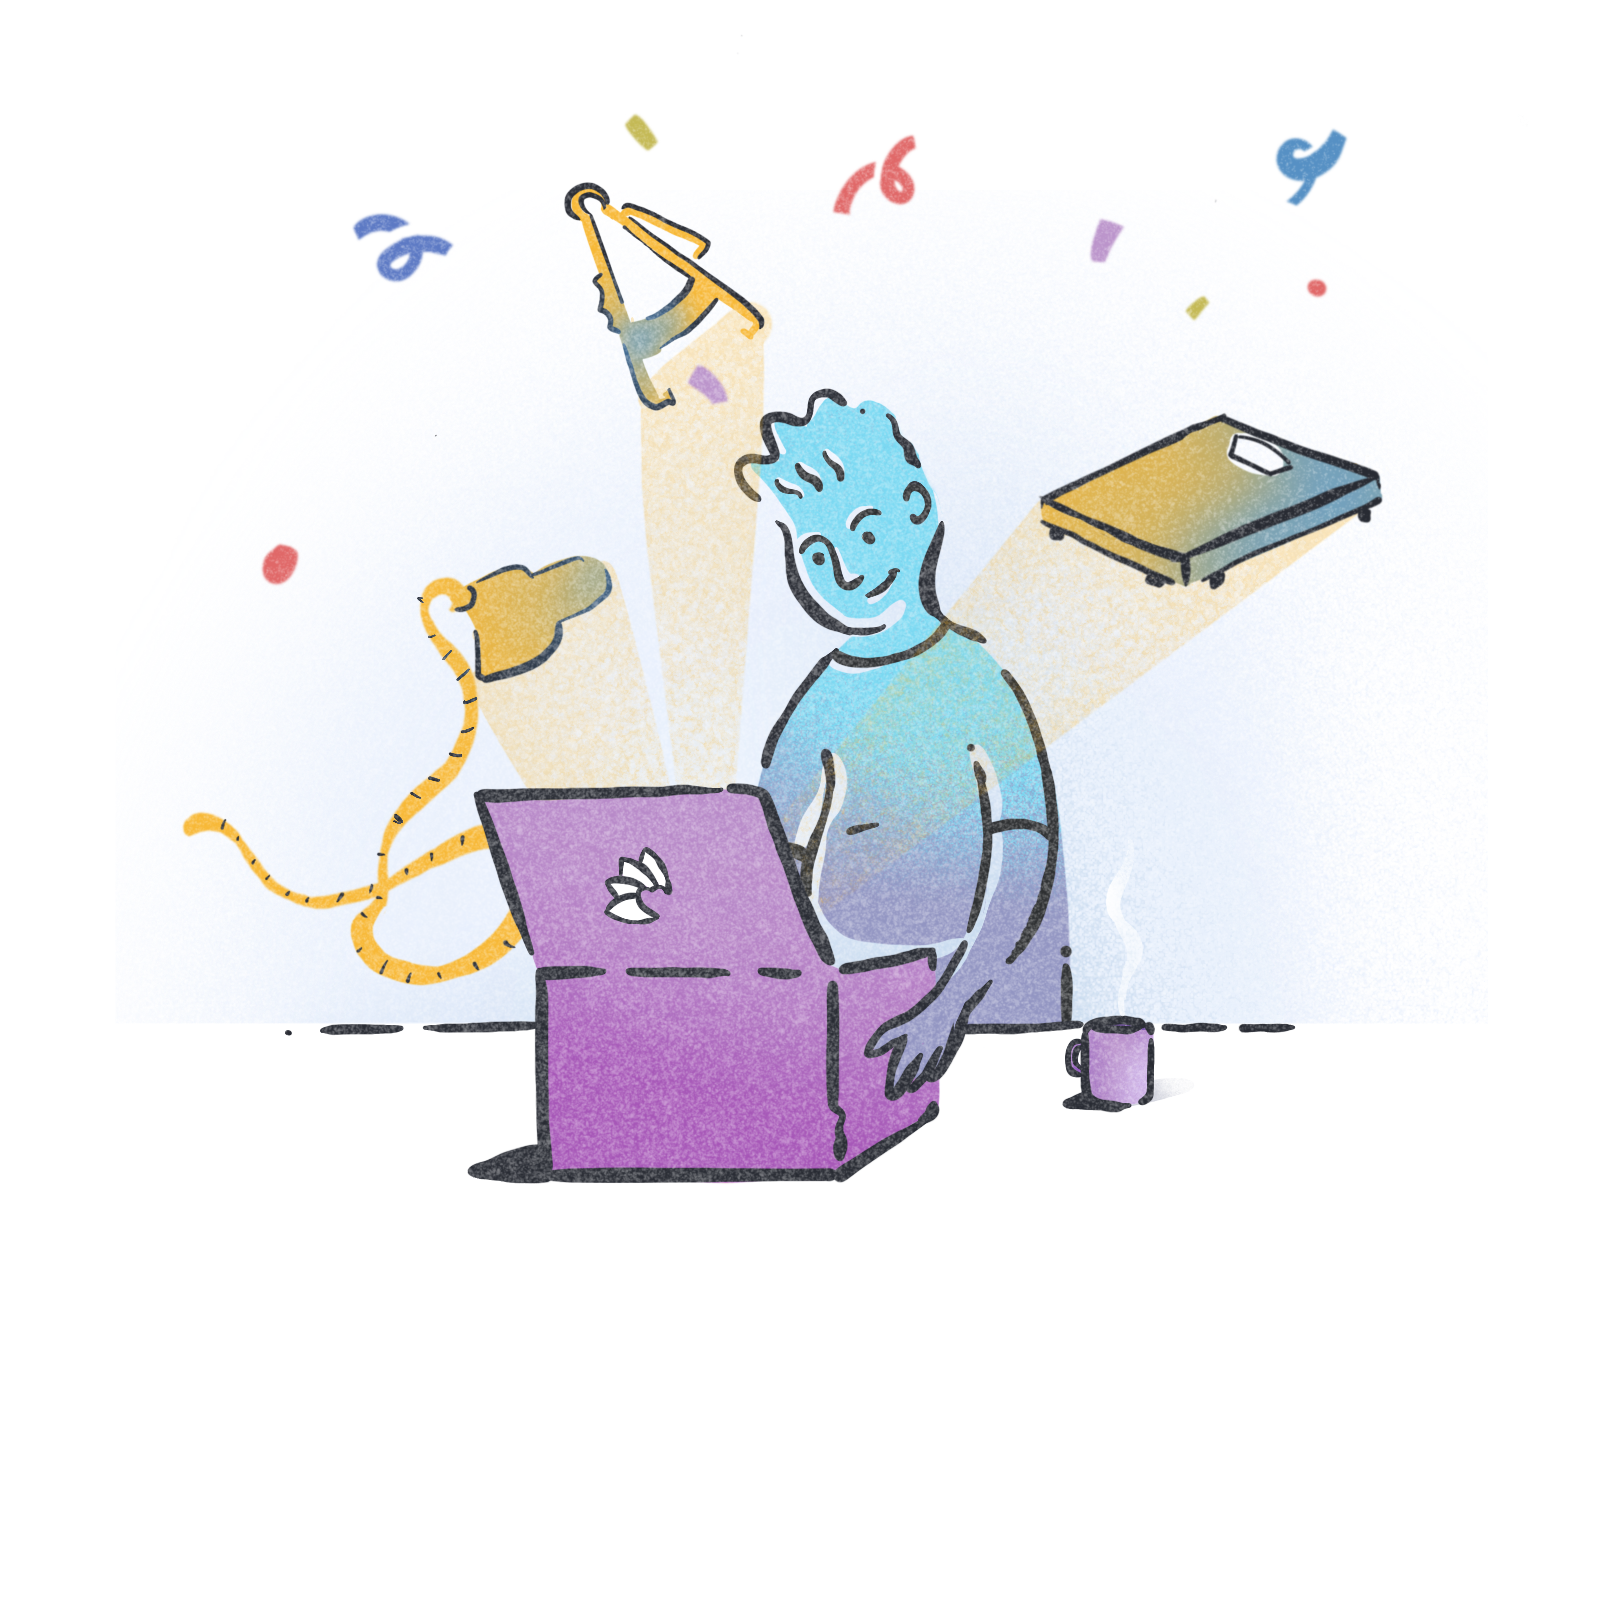 Illustration of a man opening his success kit with fat calipers, a measuring tape and a scale exploding out of the box with confetti.